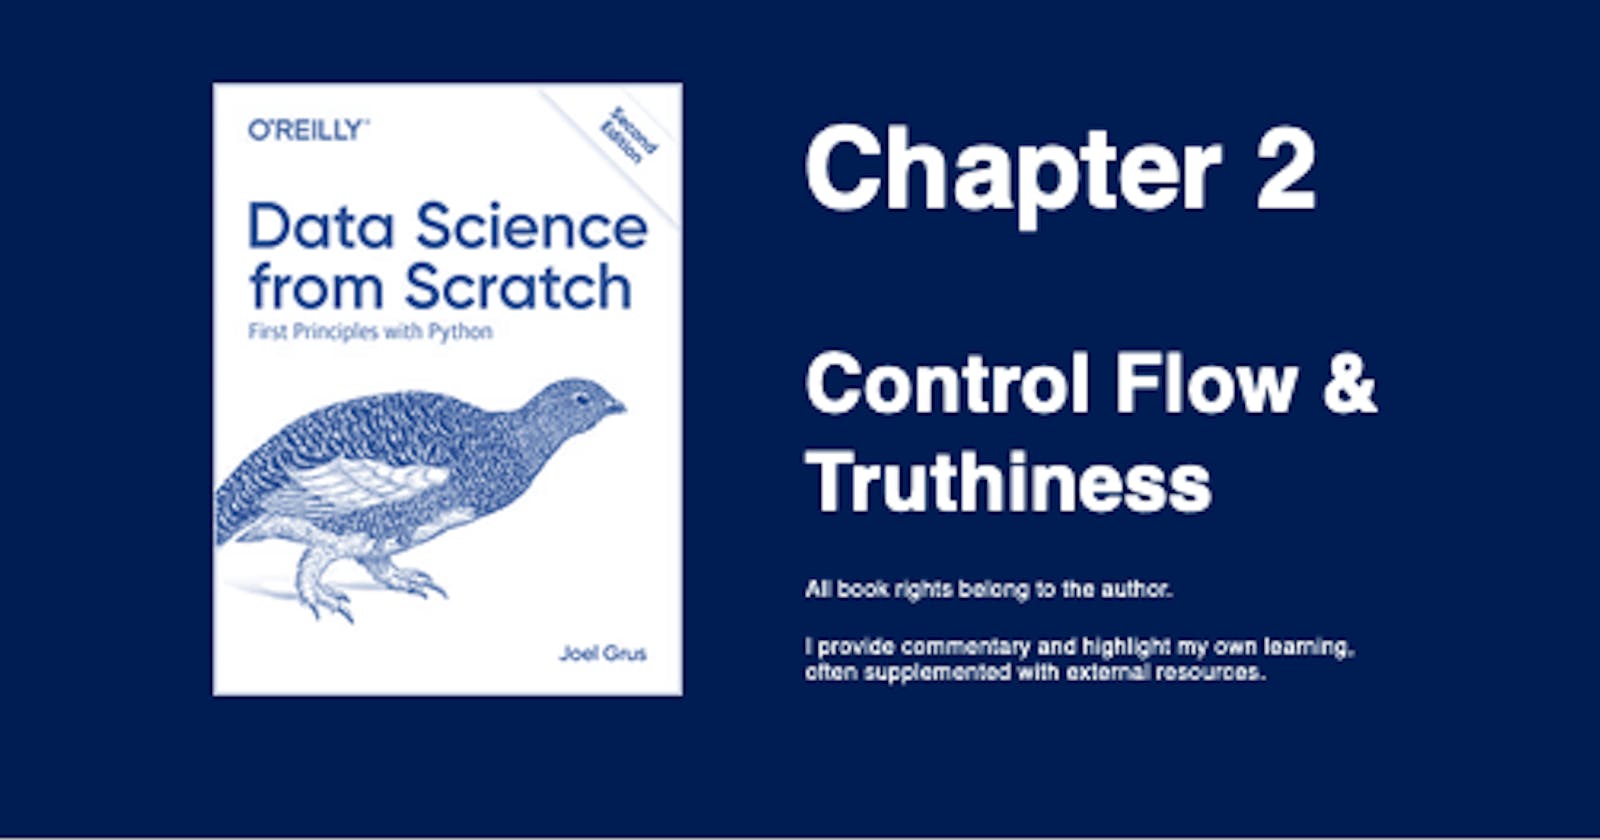 Control Flow & Truthiness